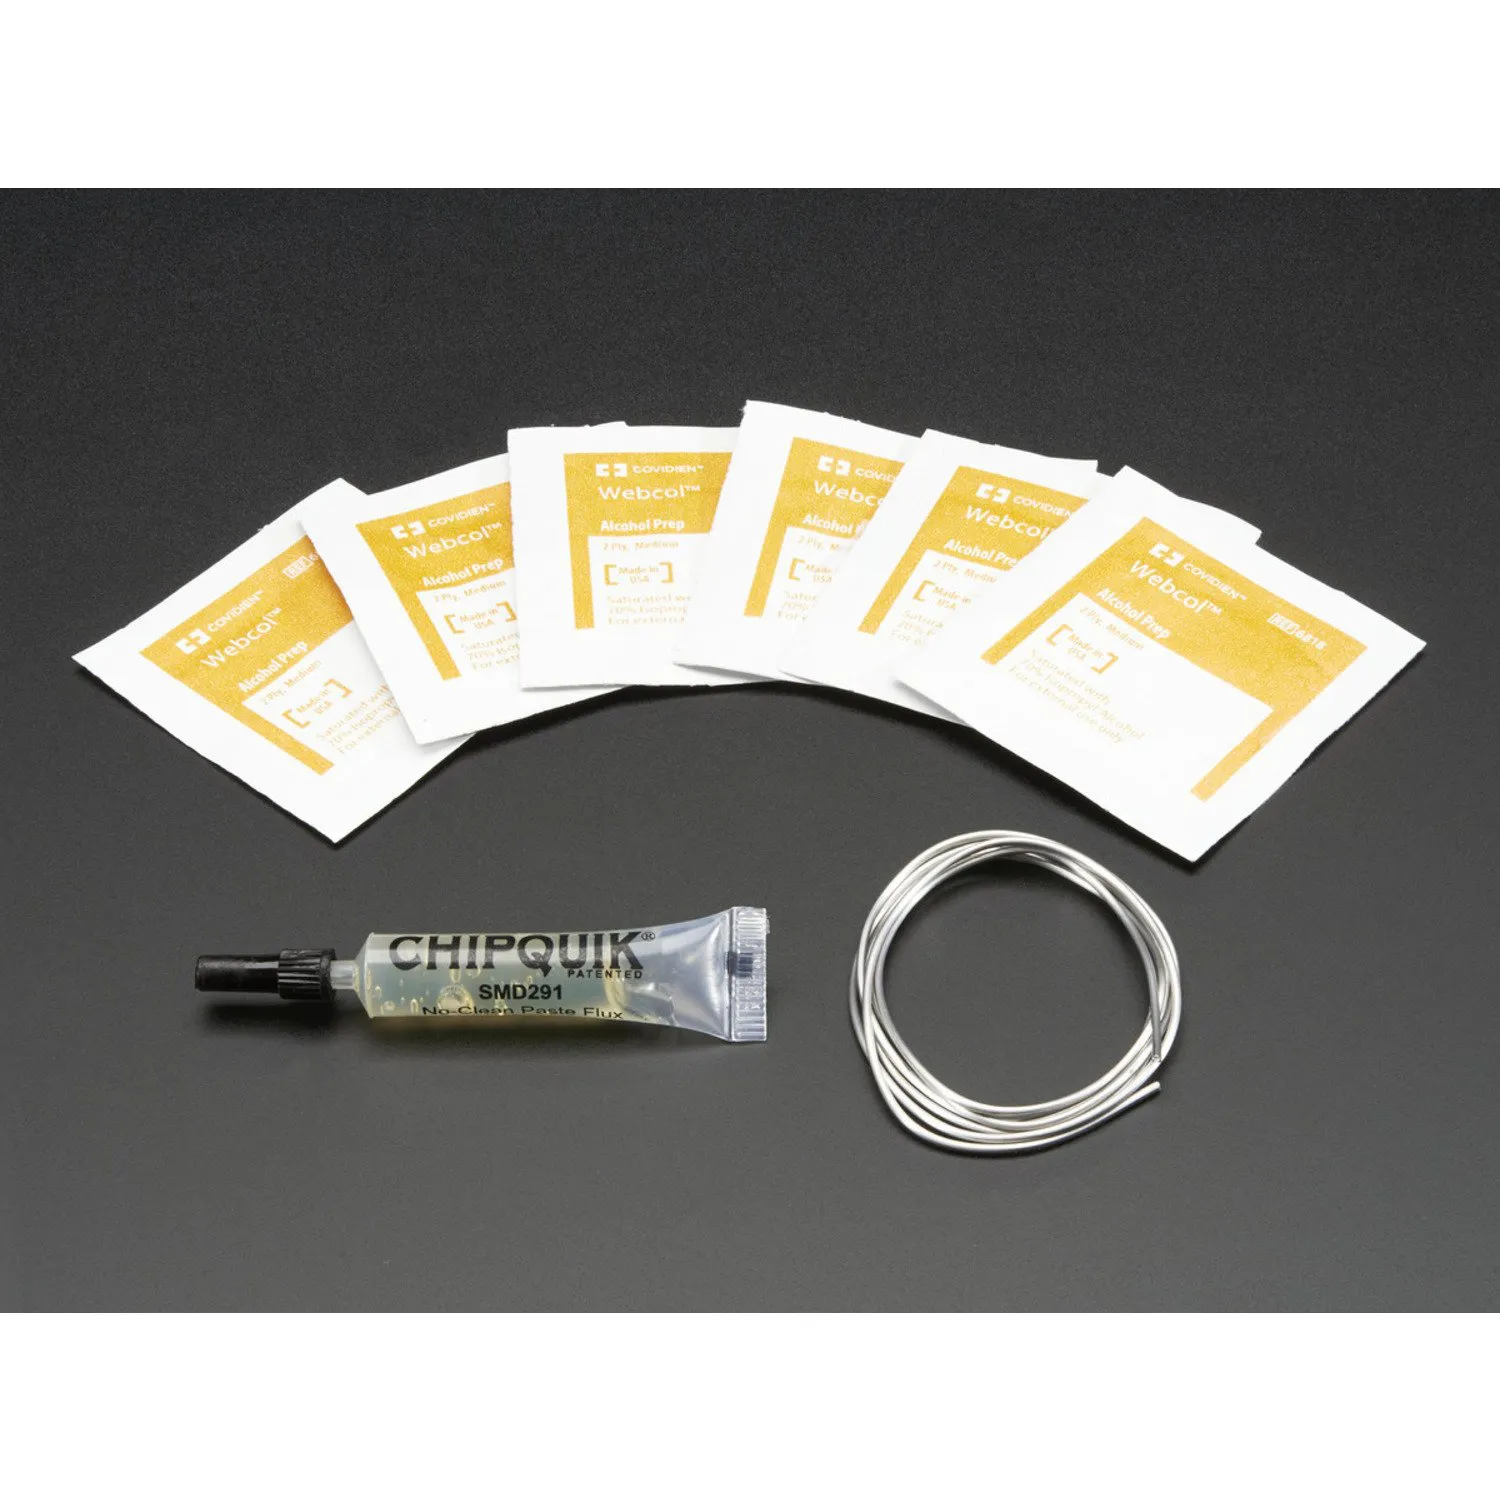 Photo of Chip Quik SMD Removal Kit with Lead-Free Alloy [SMD1NL]